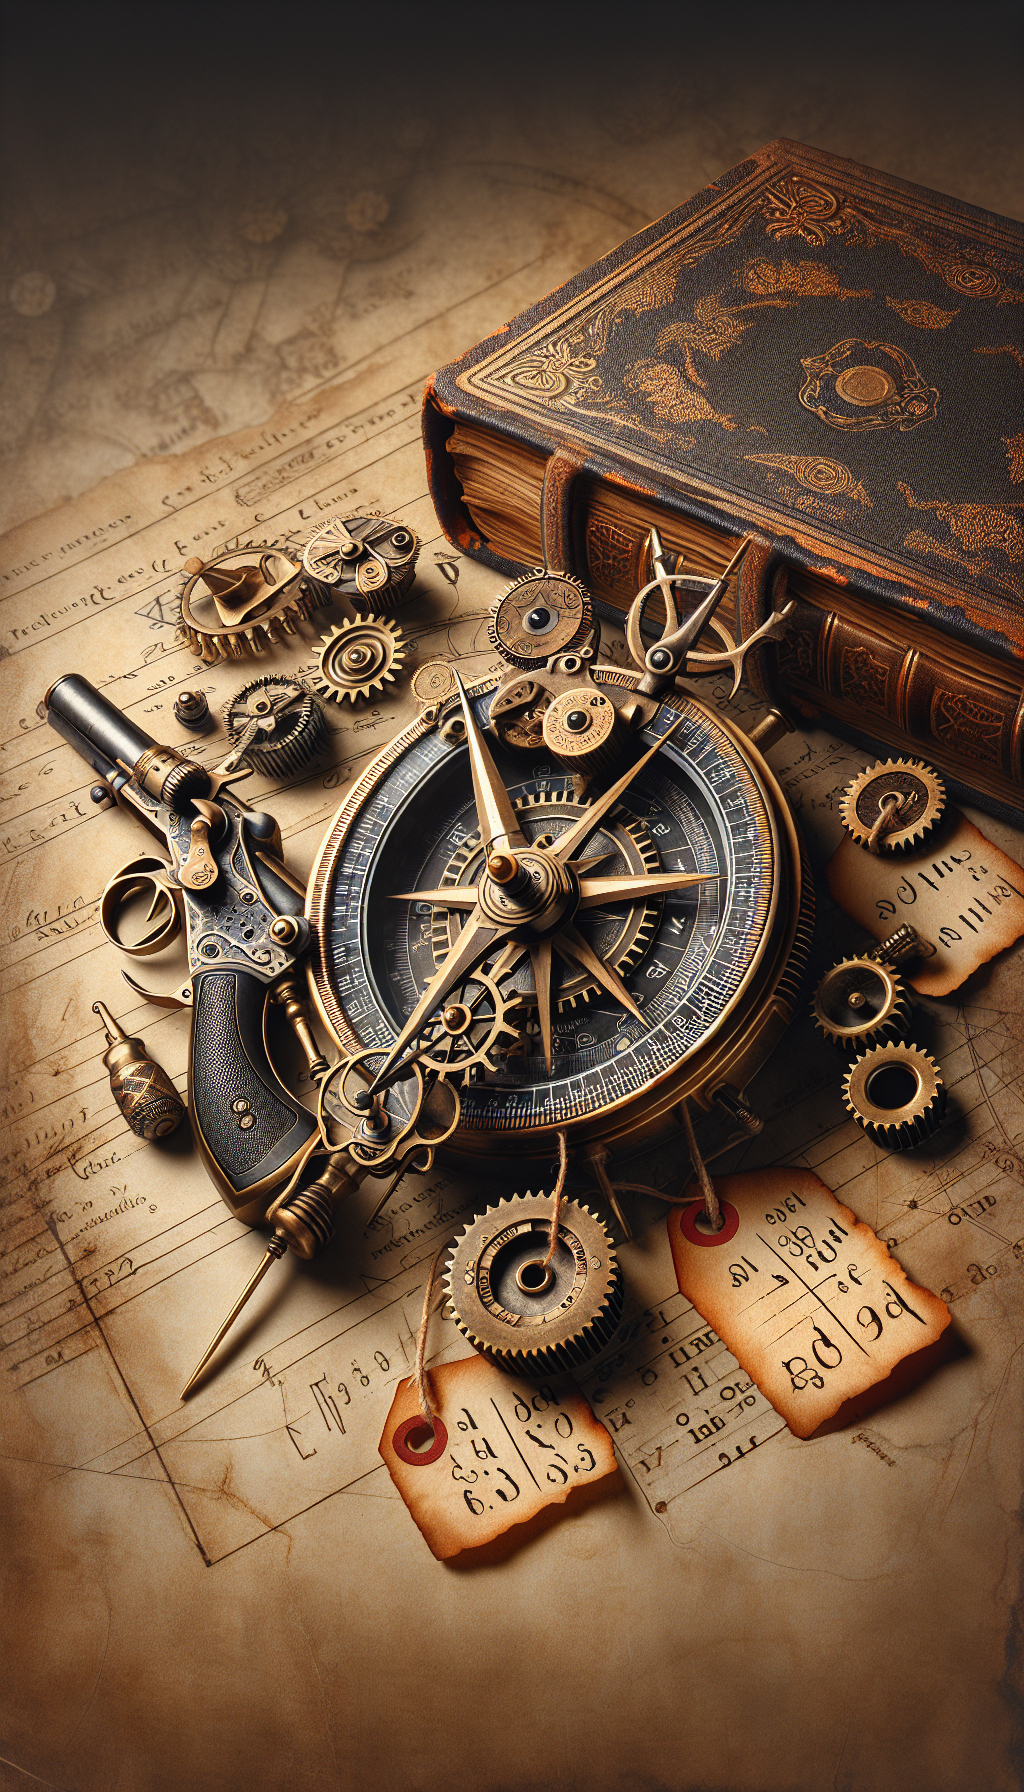 An intricate Steampunk-esque compass, with its needle pointing to a law book and a classic flintlock pistol, overlaid on parchment. Gears and scrolls surround the scene, while antique price tags dangle from the compass points. Each tag casts a shadow of different valuation figures, representing fluctuating market values in the nuanced field of antique gun collecting.